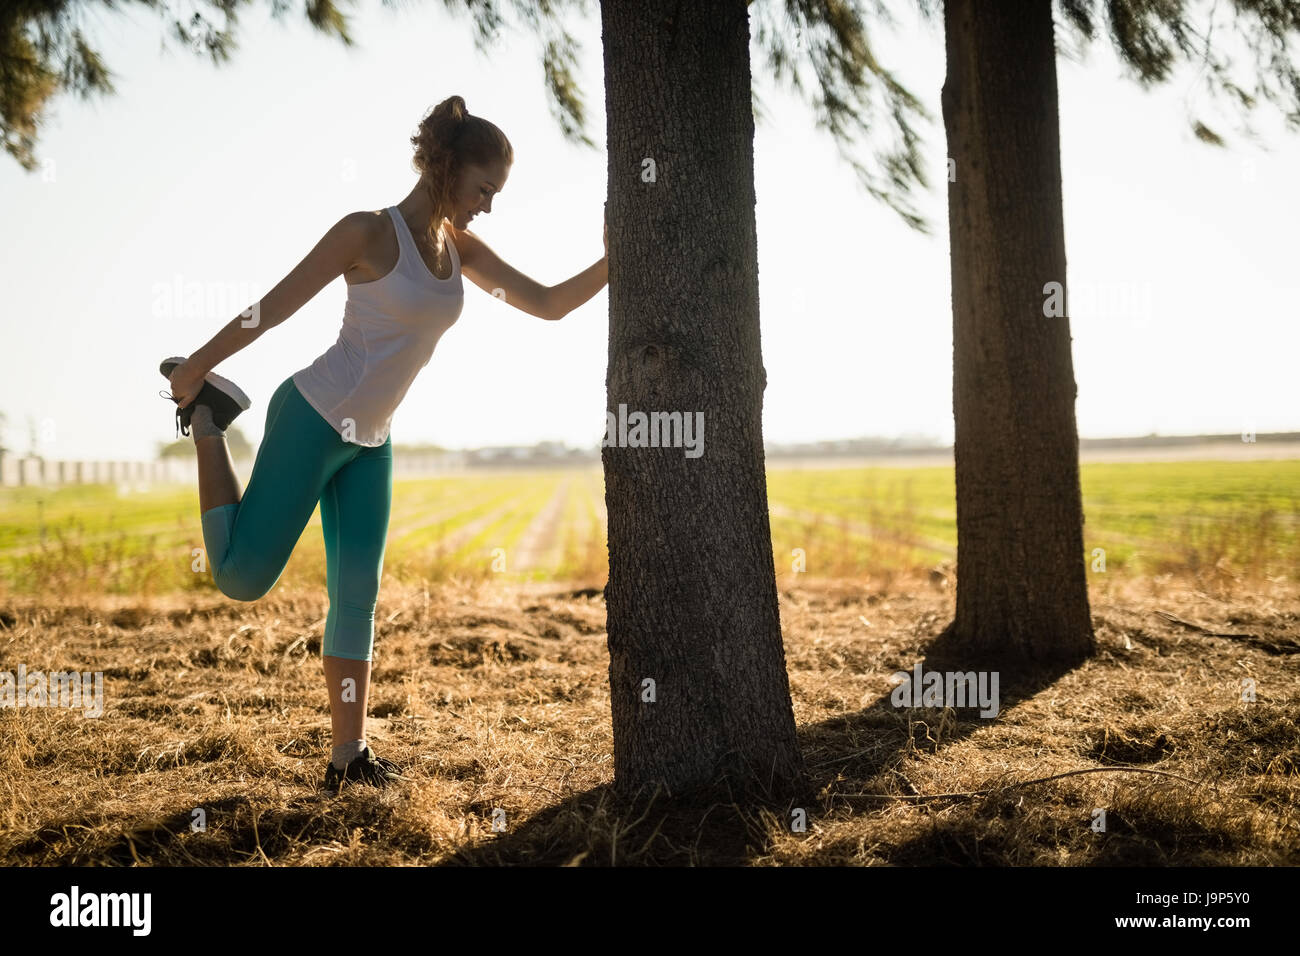 Full length of young woman exercising by tree at farm Stock Photo